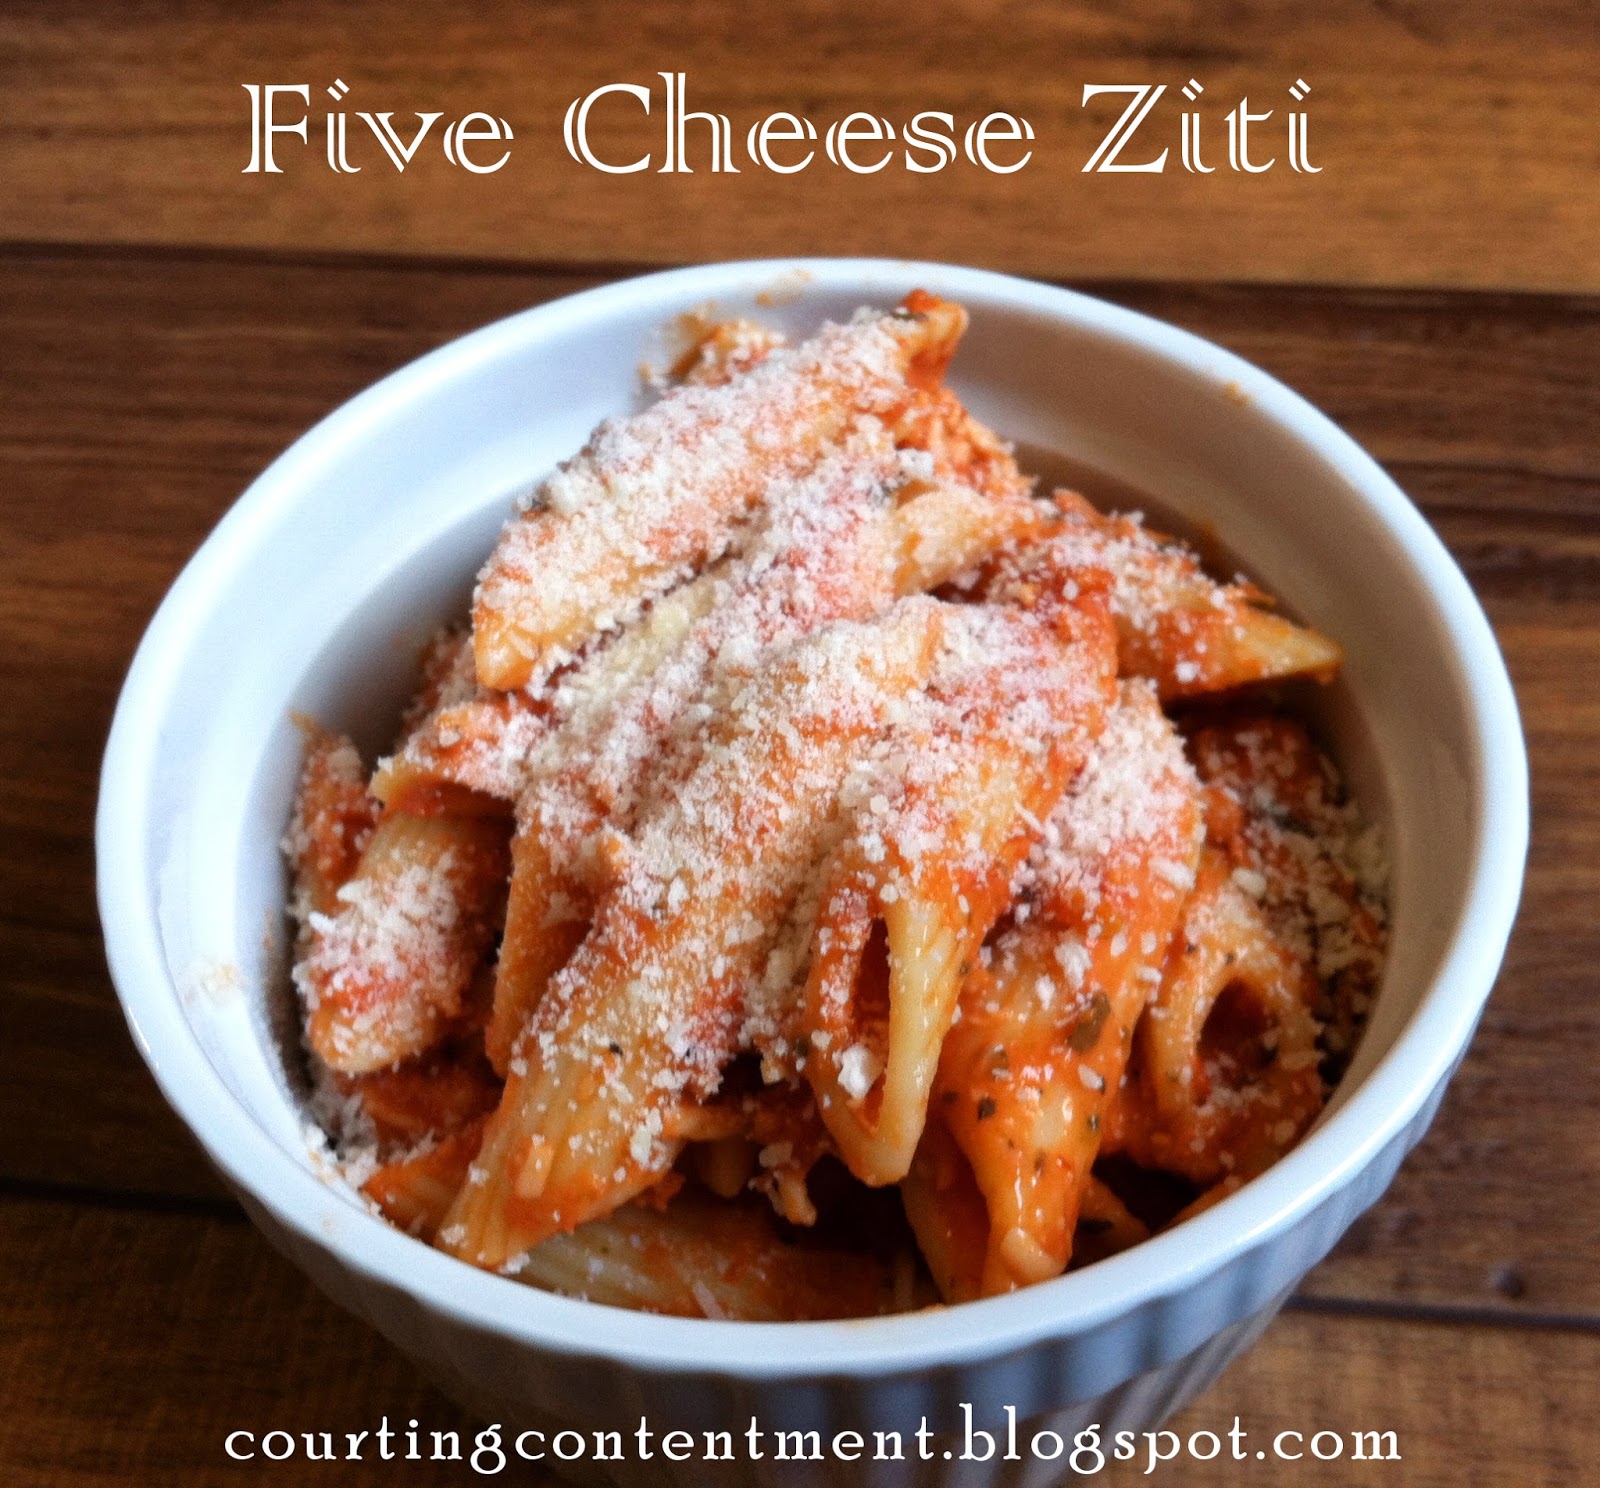 Courting Contentment Copycat Five Cheese Ziti From Olive Garden